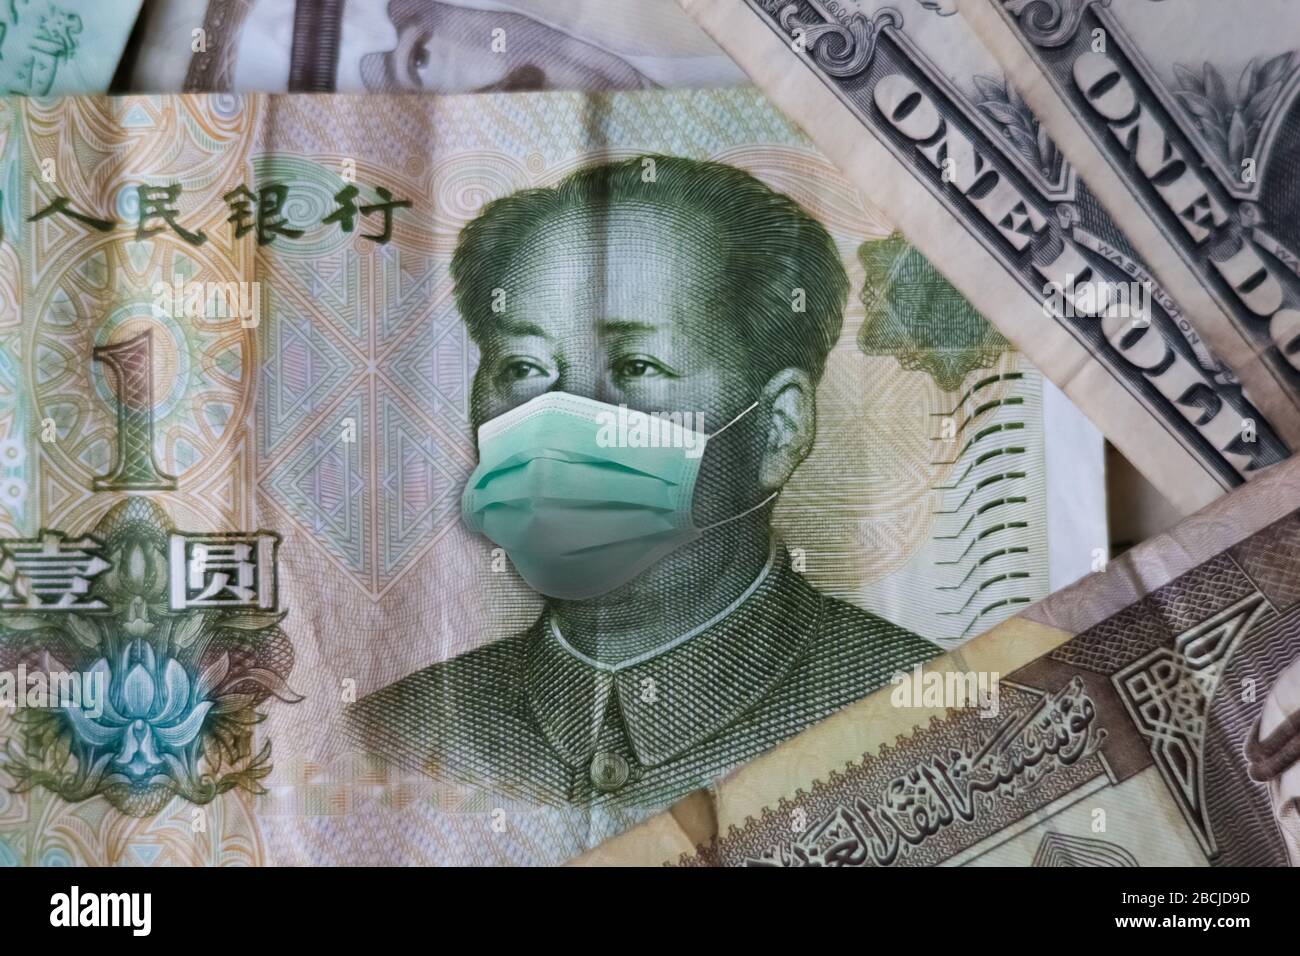 Coronavirus Wuhan virus illness. Concept: Quarantine in China, 1 Yuan banknote with face mask. Economy and financial markets affected by corona virus Stock Photo